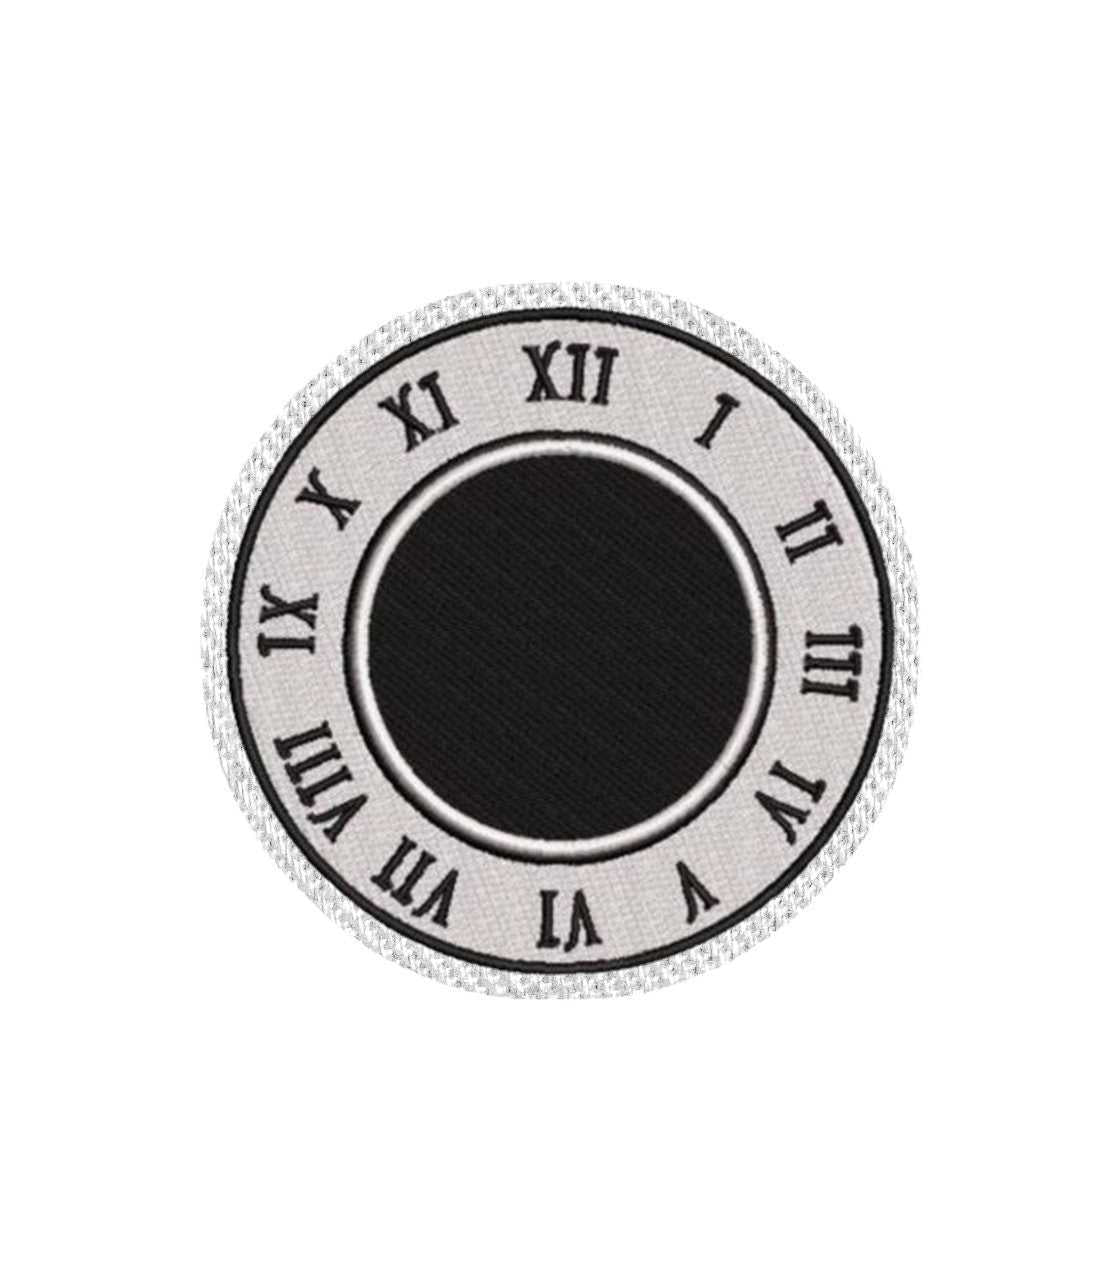 Clock Face Iron on Patch/Sew on embroidered patches House & Home Bedroom Embroidery Women Applique Merit Badge for Clothing Jacket